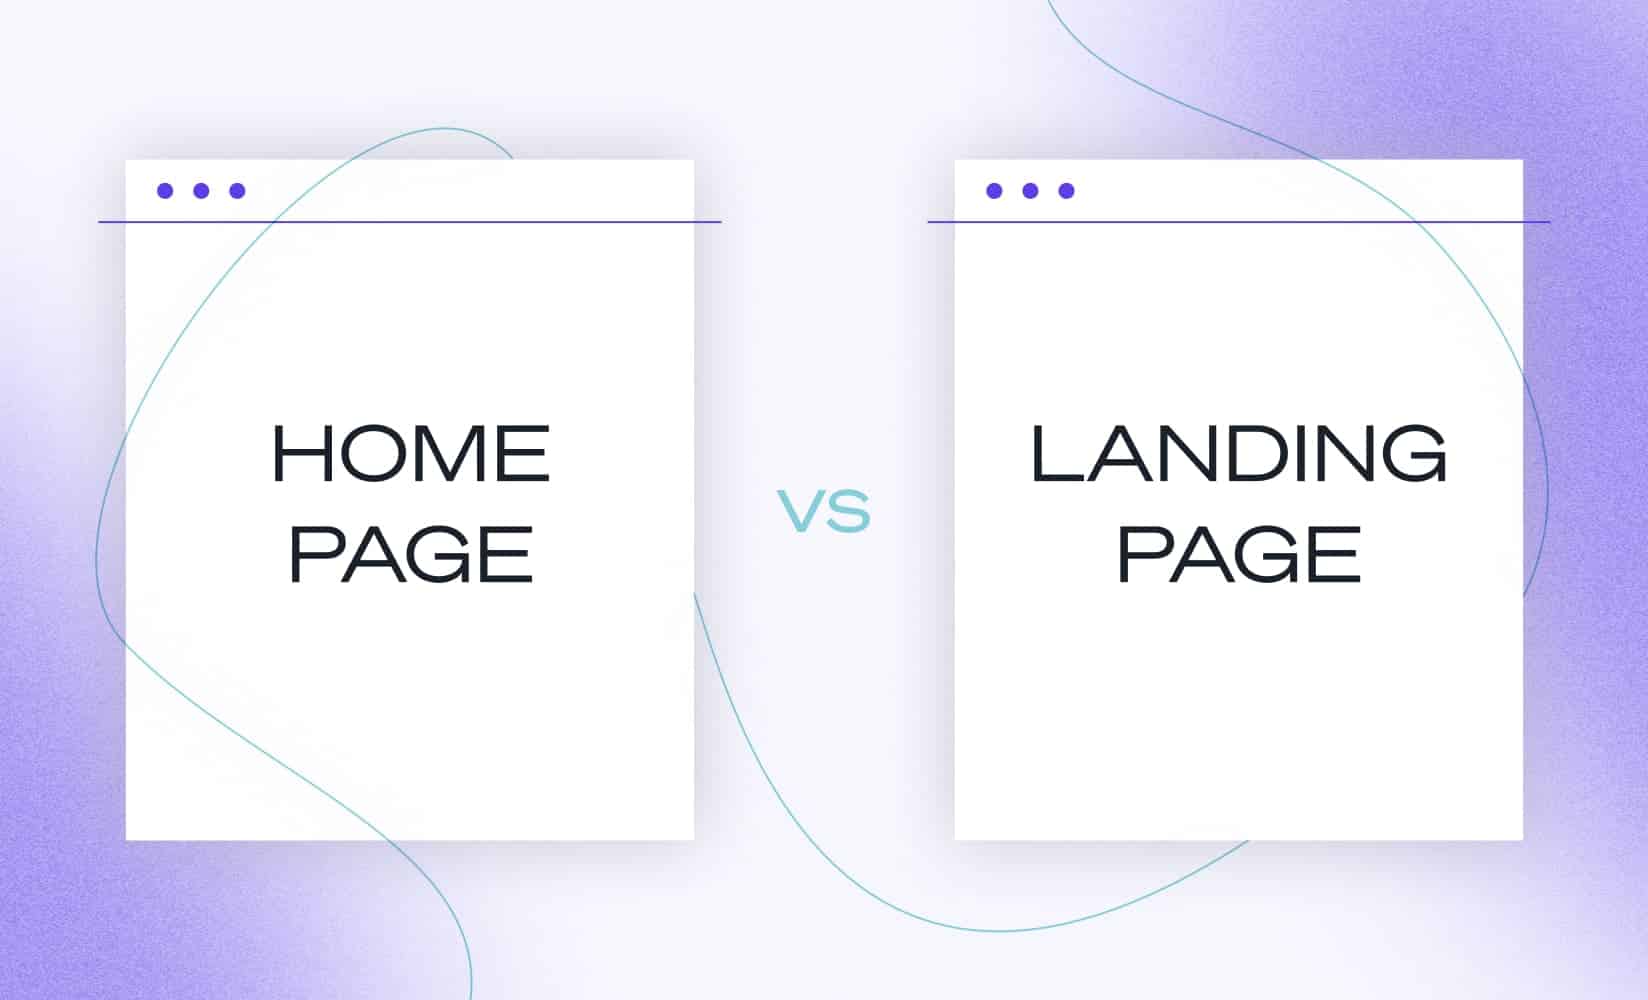 Why do we need a home page?